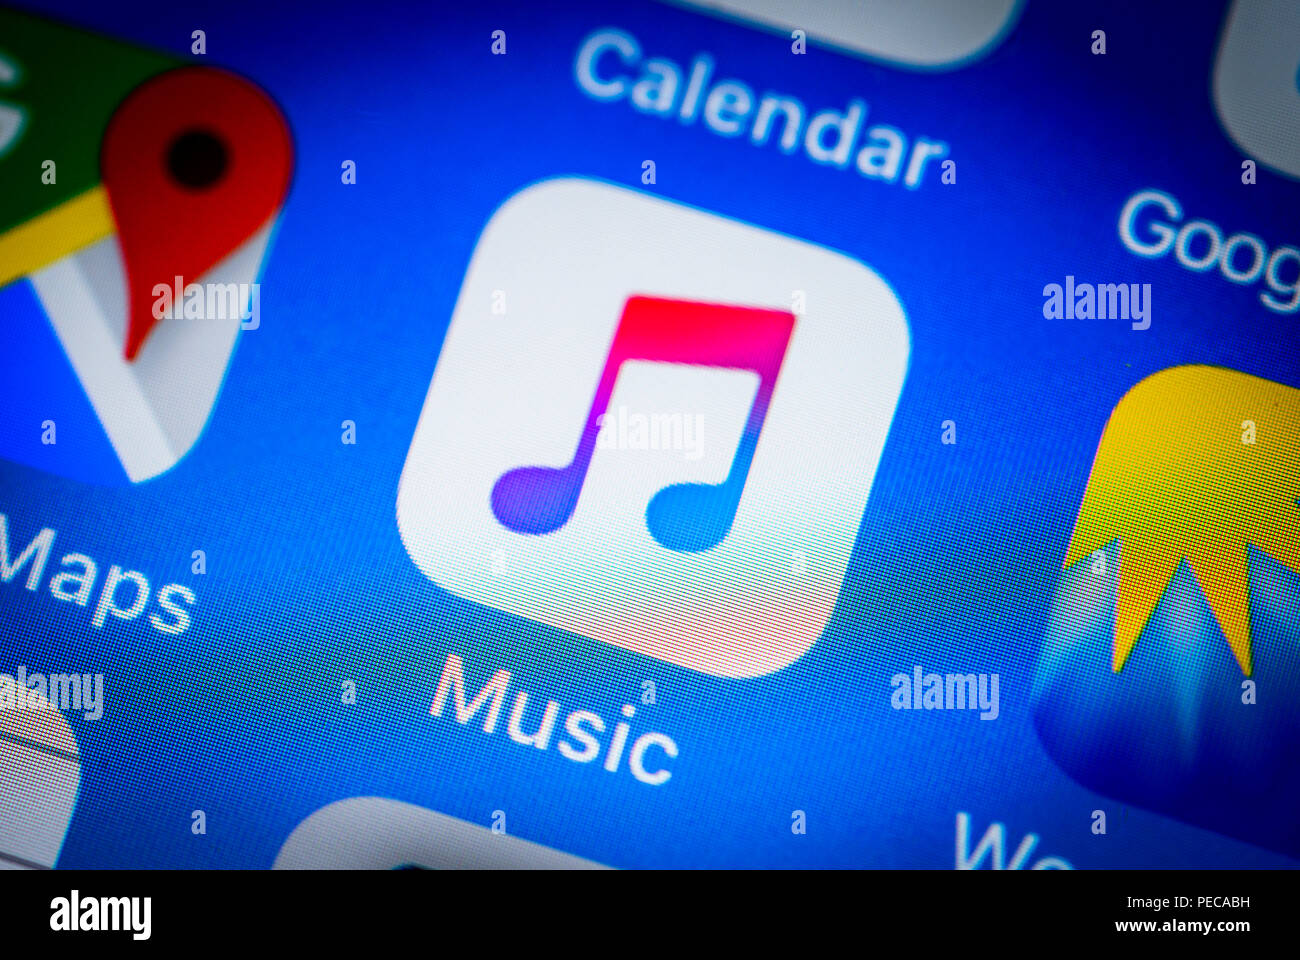 Apple Music, music streaming, app icon on iPhone, iOS, smartphone screen, display, close-up, detail, Germany Stock Photo